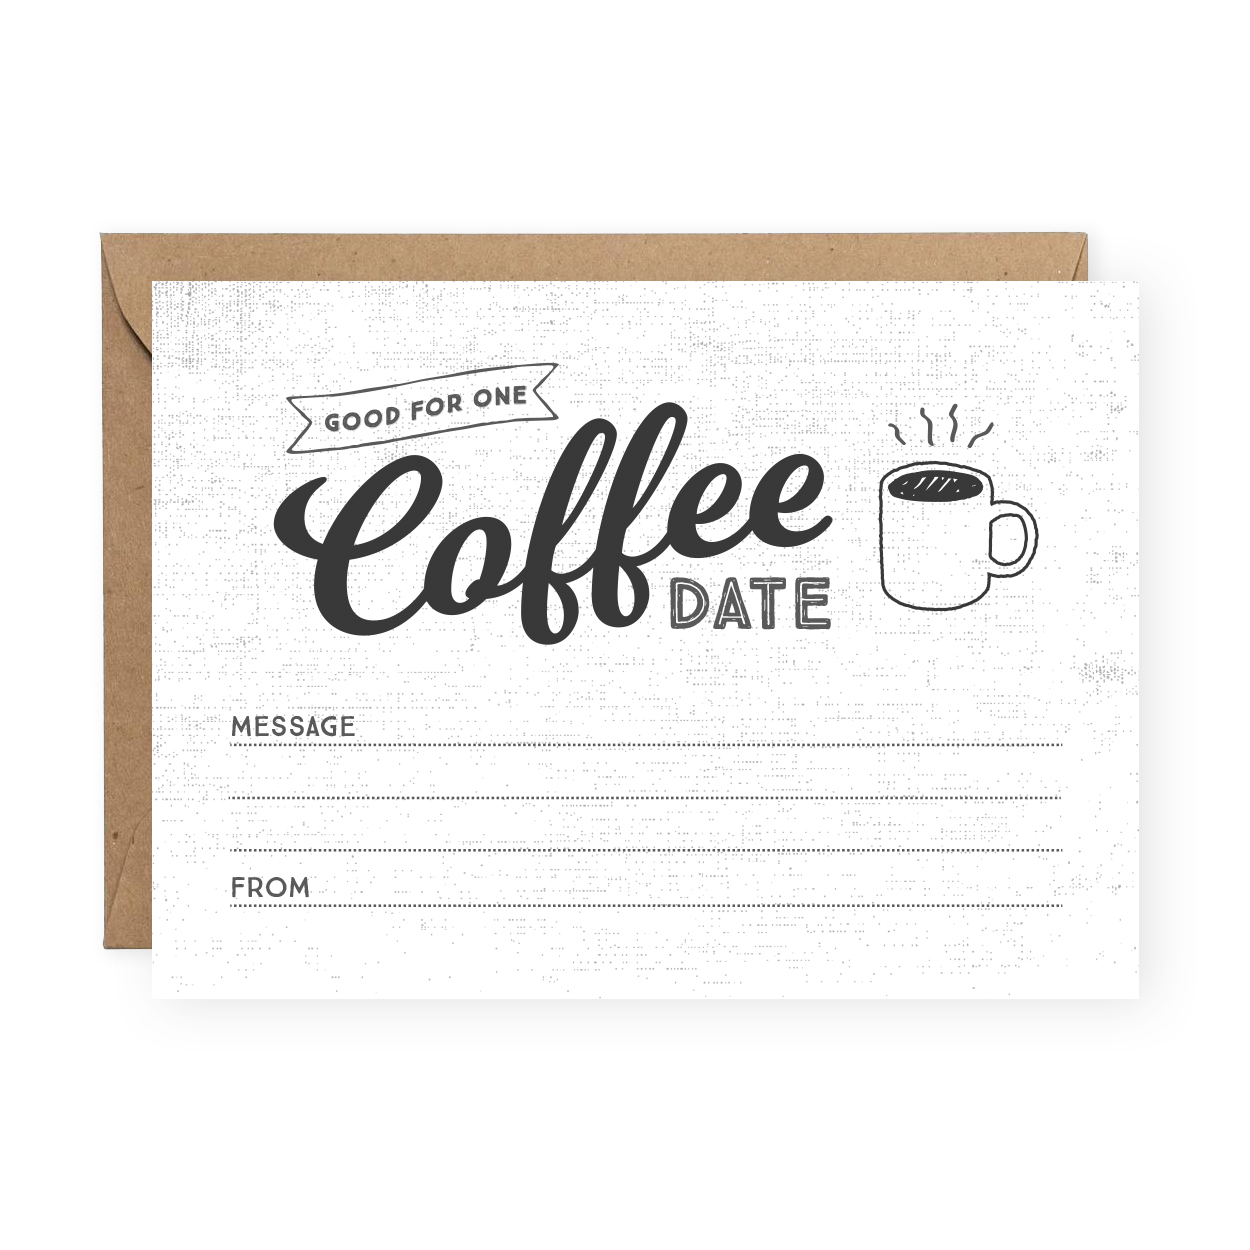 Gifts for Coffee Lovers: Coffee Date Card Set - There’s just something about a coffee date. It’s perfectly casual, cozy and cute. These adorable cards are a sweet and personal way to say “let’s catch up.” Whether it’s a new friend or an old acquaintance, no one can turn down a coffee date when they’re invited with a coffee card this cute. (And, you can gift your favorite coffee lover with a set of their own use or just ask them on a coffee date as part of your gift!)